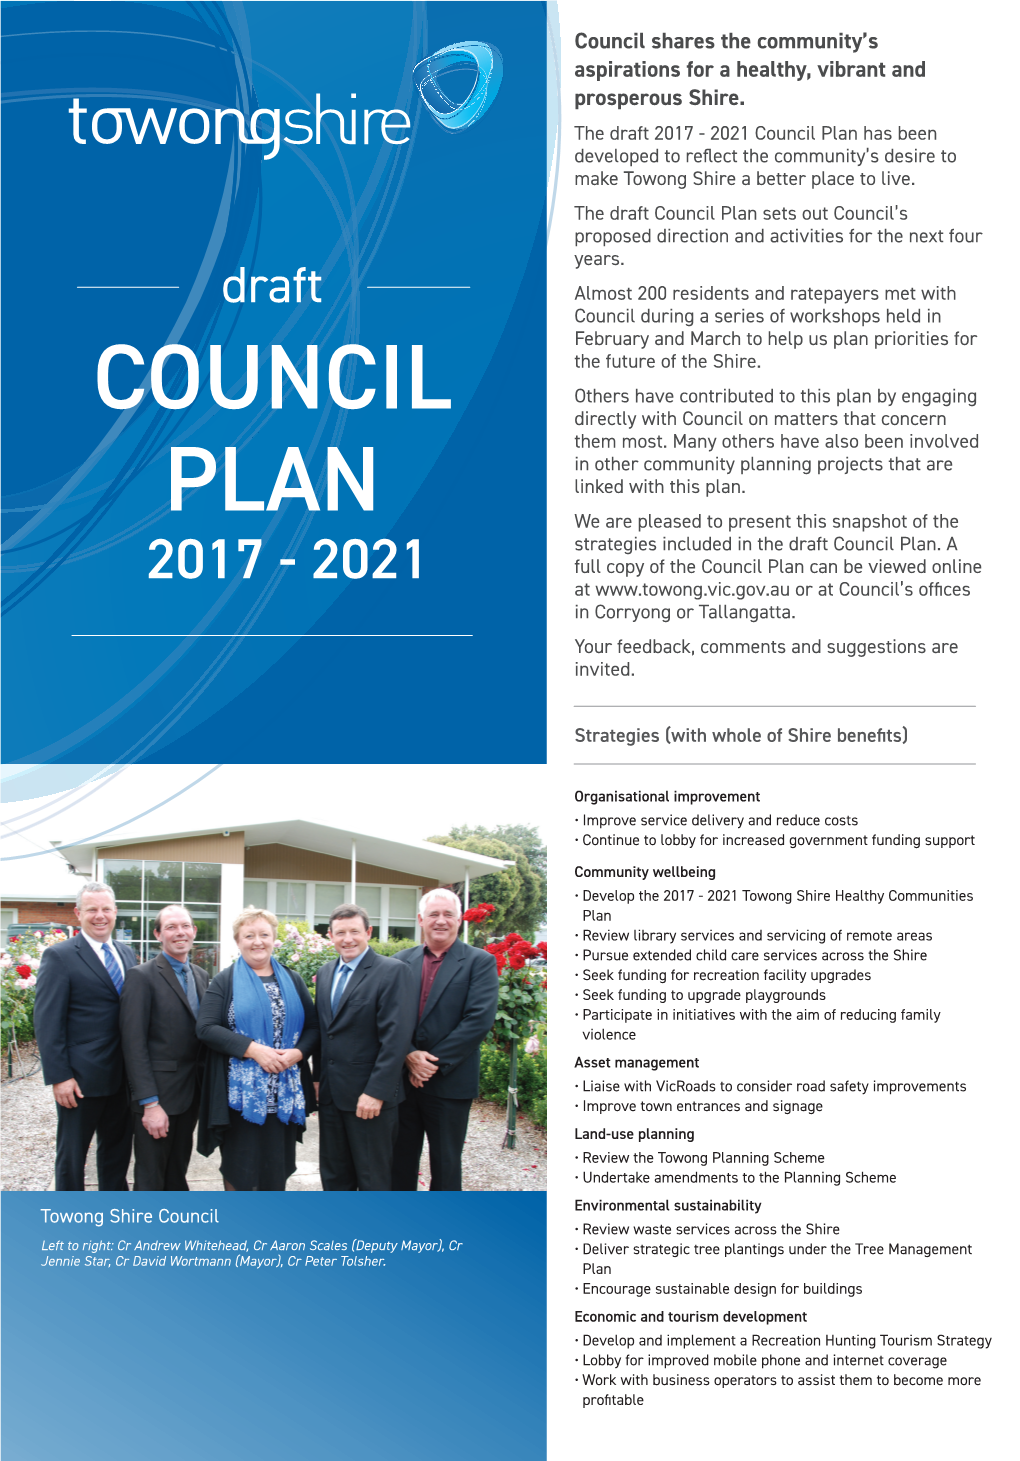 Council Plan Has Been Developed to Reflect the Community’S Desire to Make Towong Shire a Better Place to Live